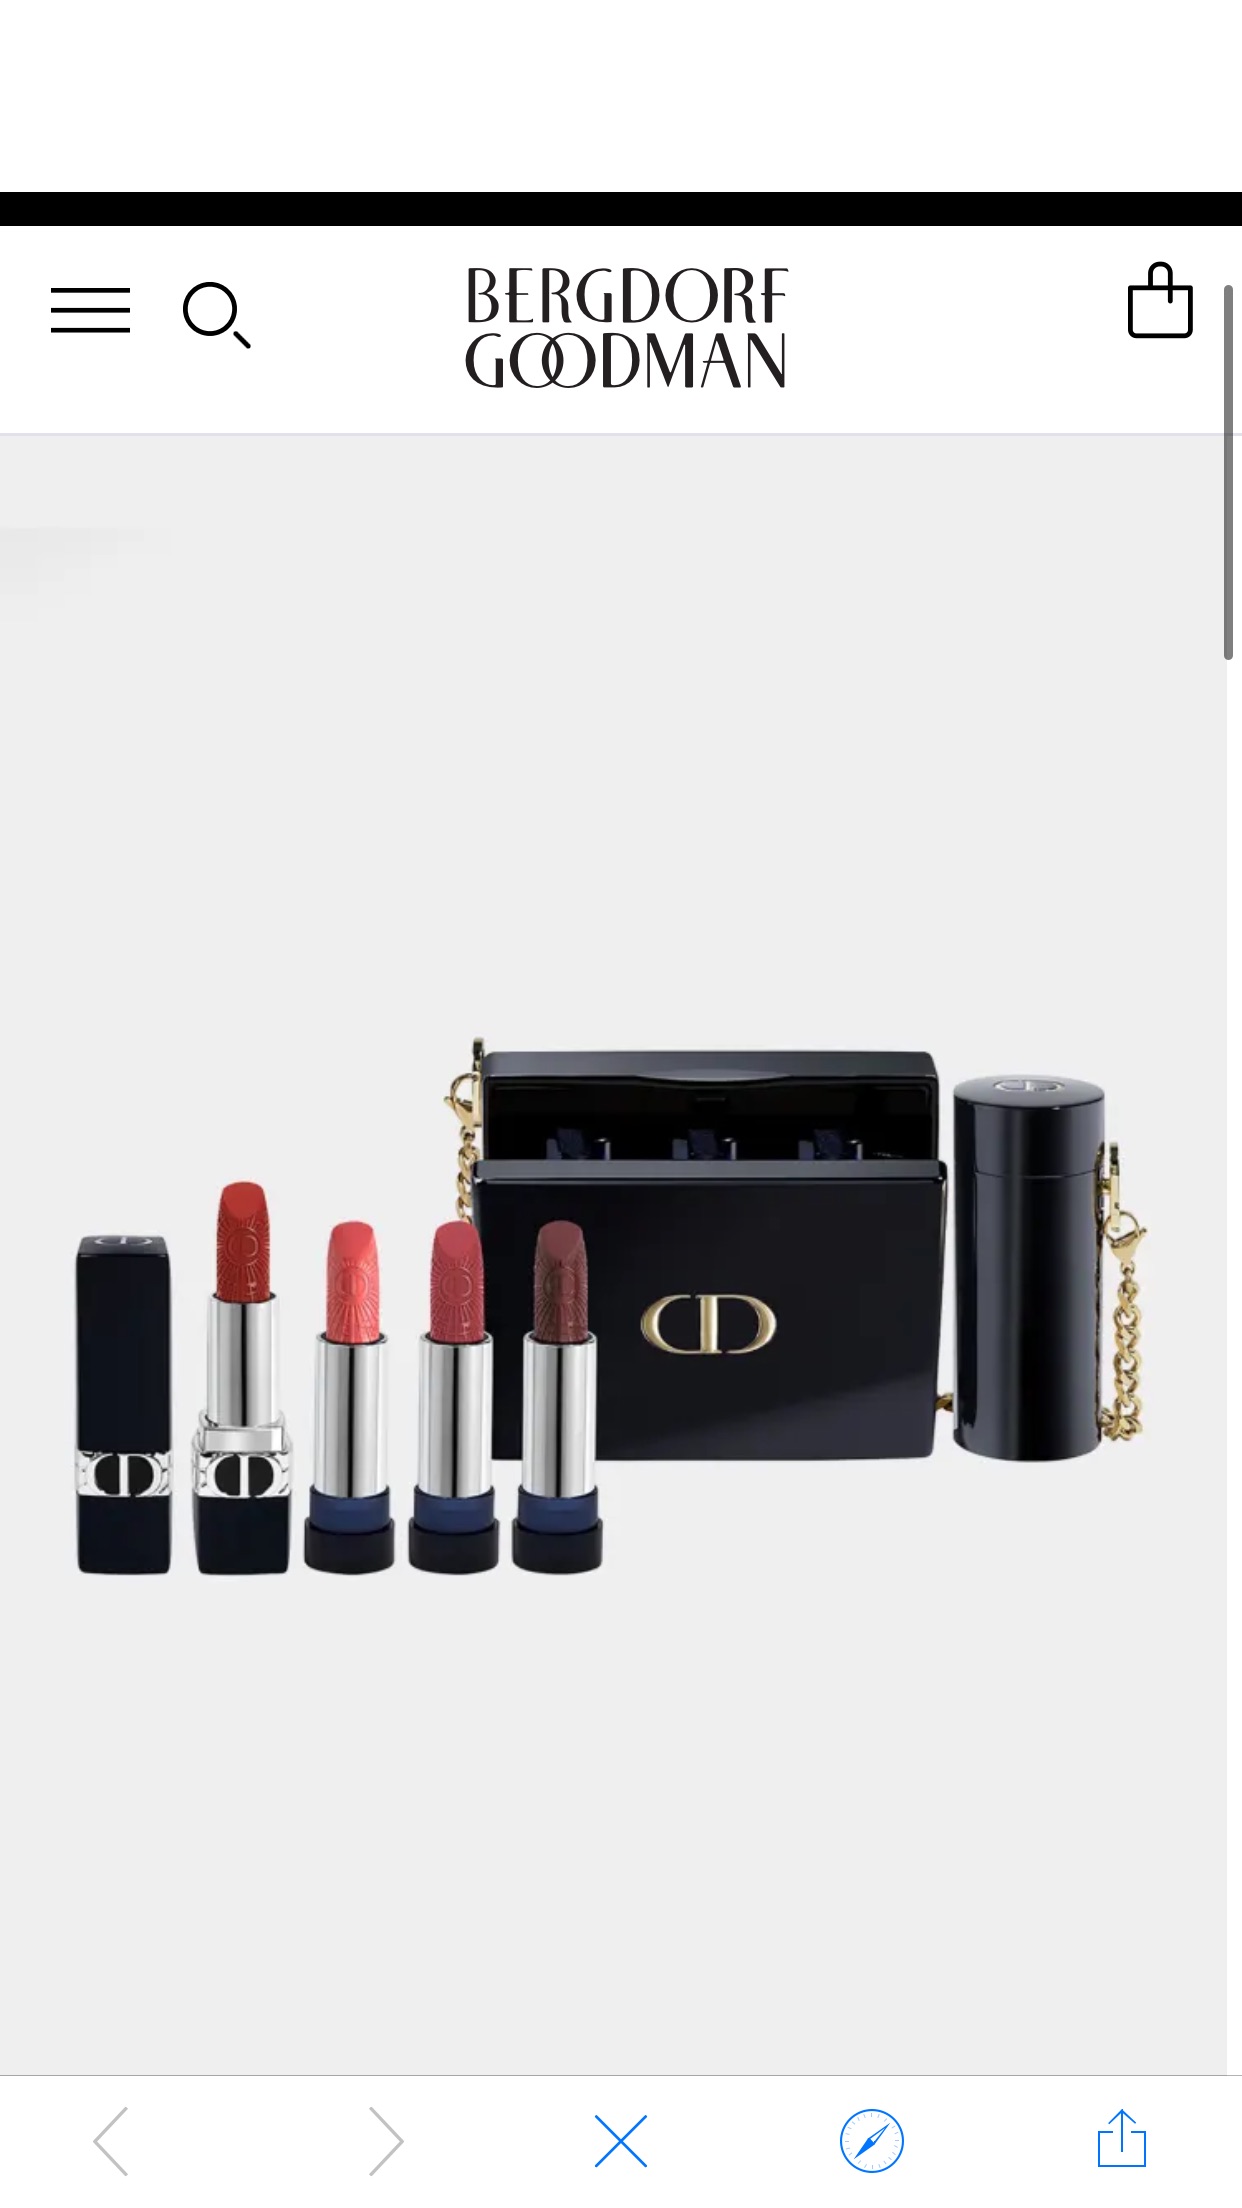 Dior Limited Edition Rouge Dior Minaudiere Clutch and Lipstick Set - Bergdorf Goodman